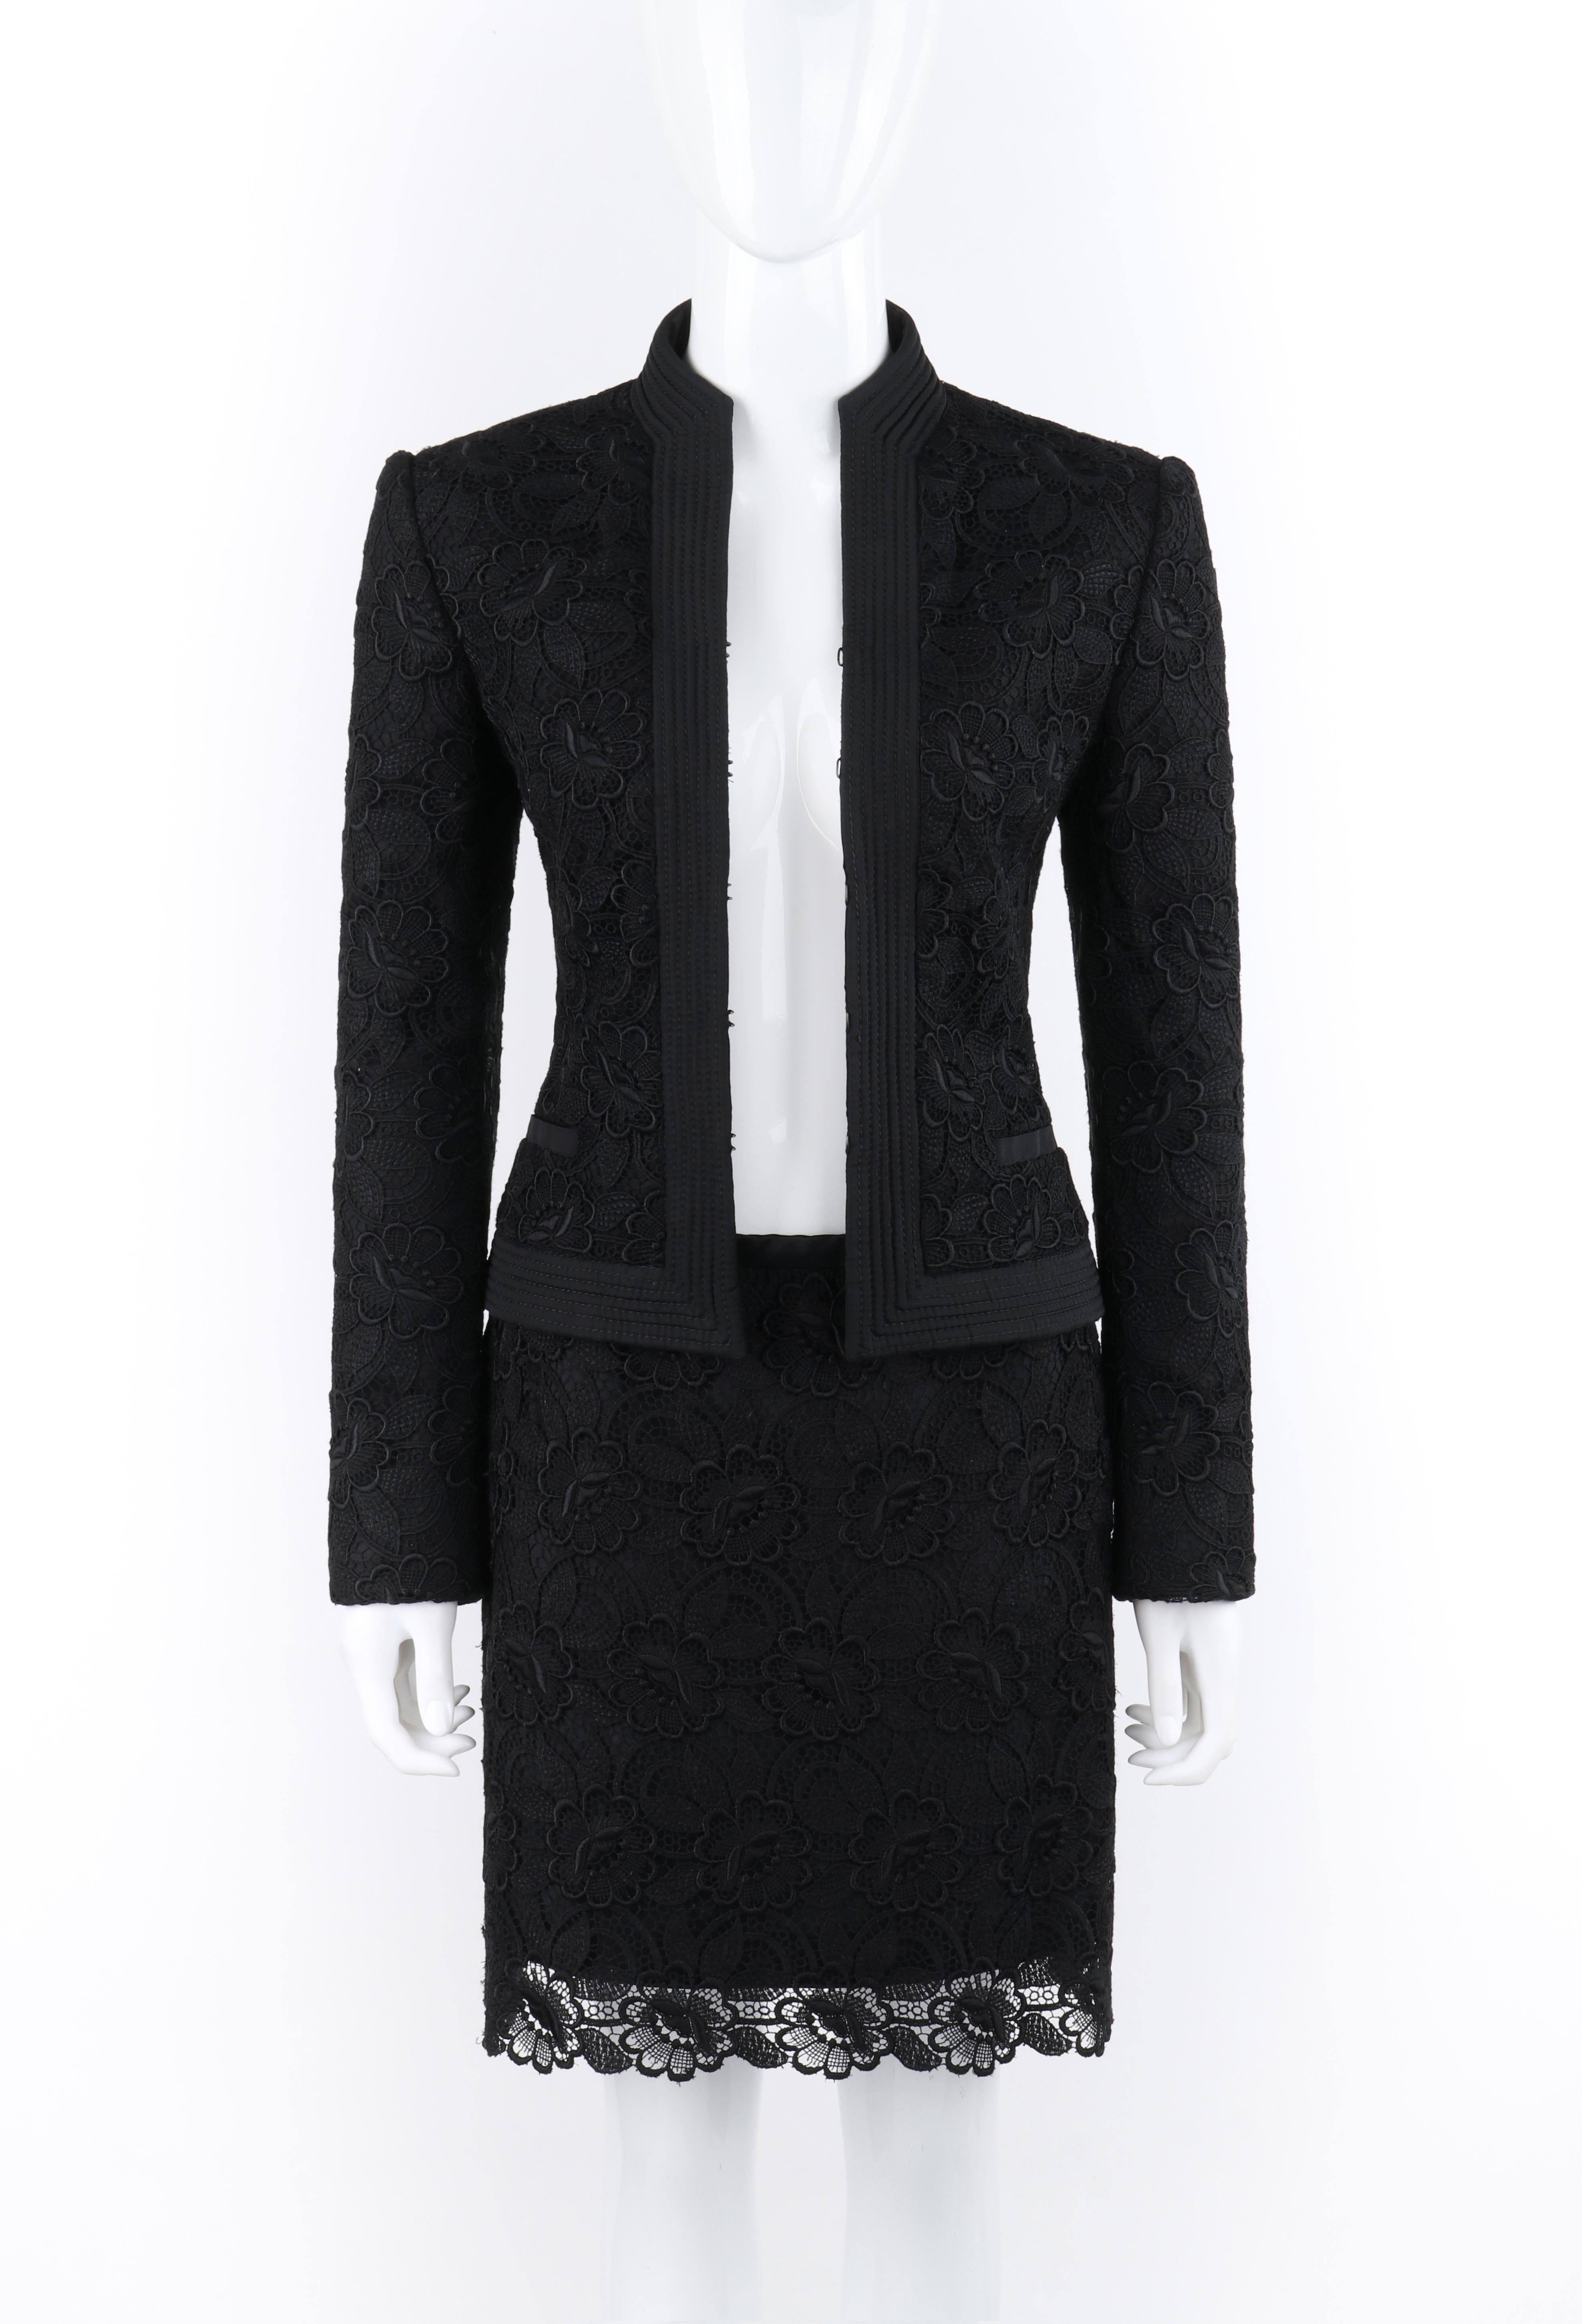 ALEXANDER McQUEEN Pre-Fall 2006 Black Two Piece Lace Jacket Skirt Suit Set In Good Condition For Sale In Thiensville, WI